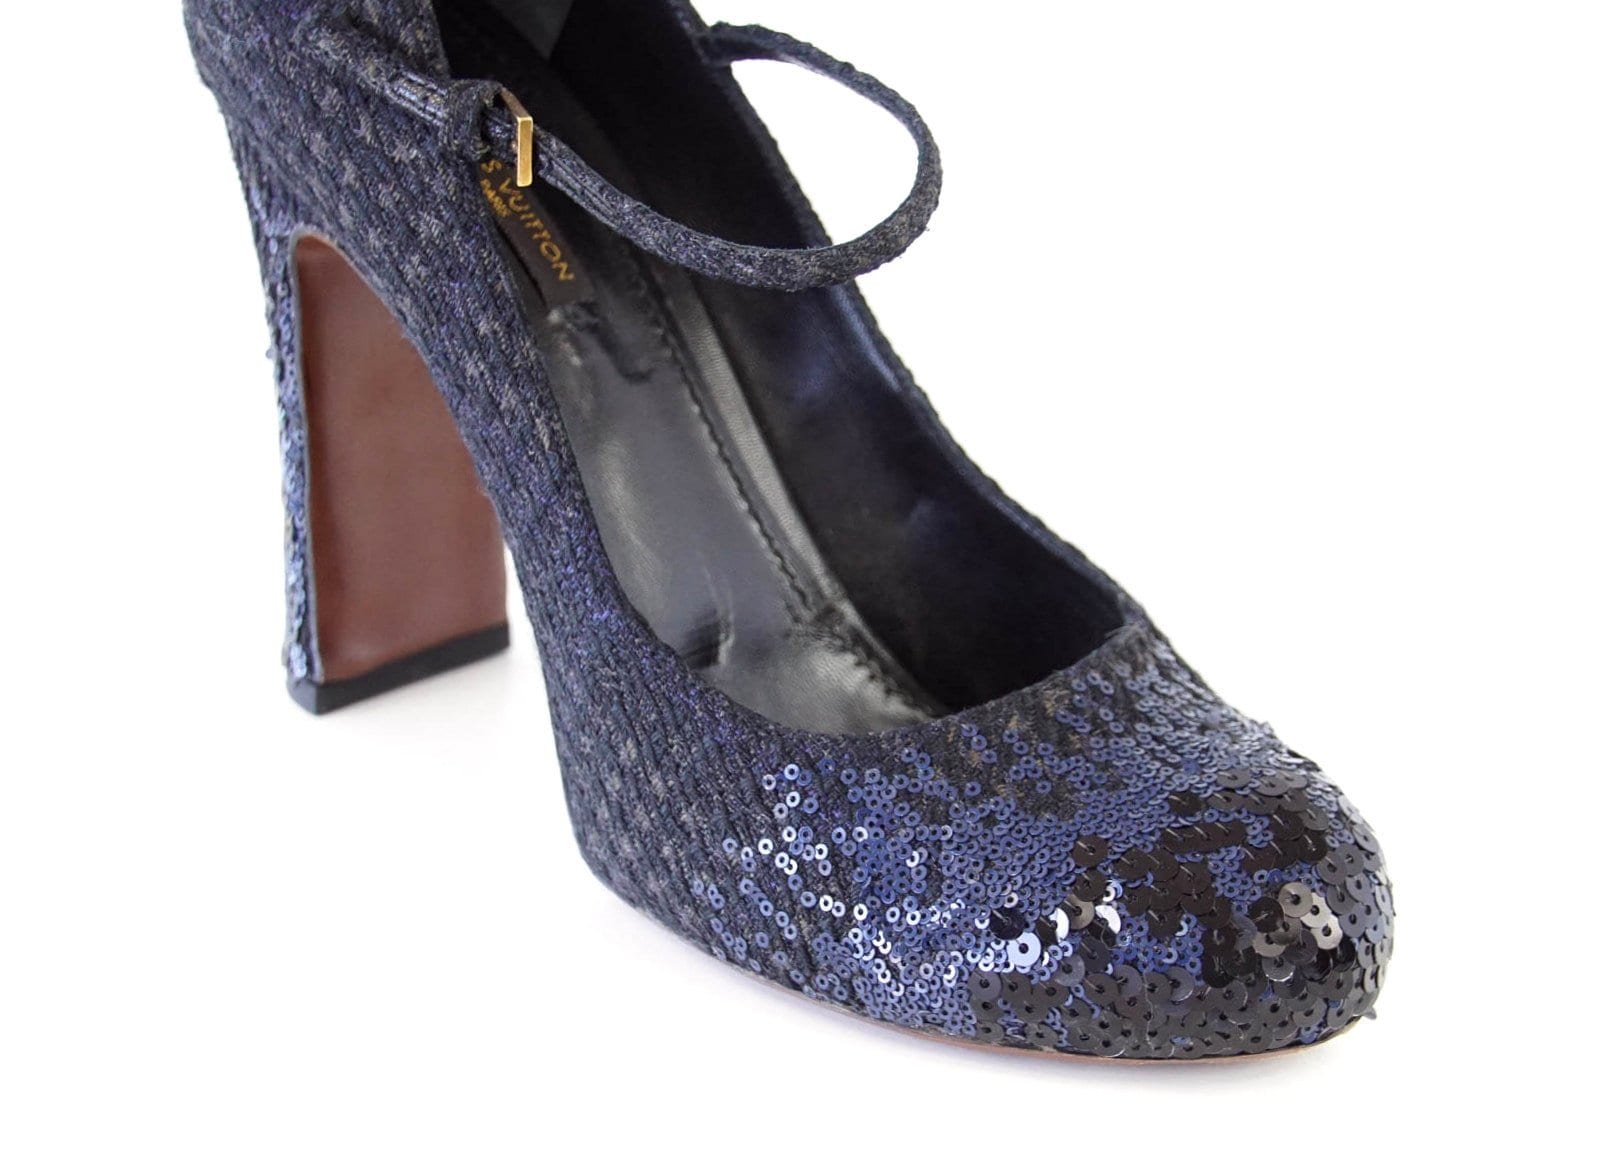 Louis Vuitton Shoe Mary Jane Tweed Sequined Detail 39 / 9